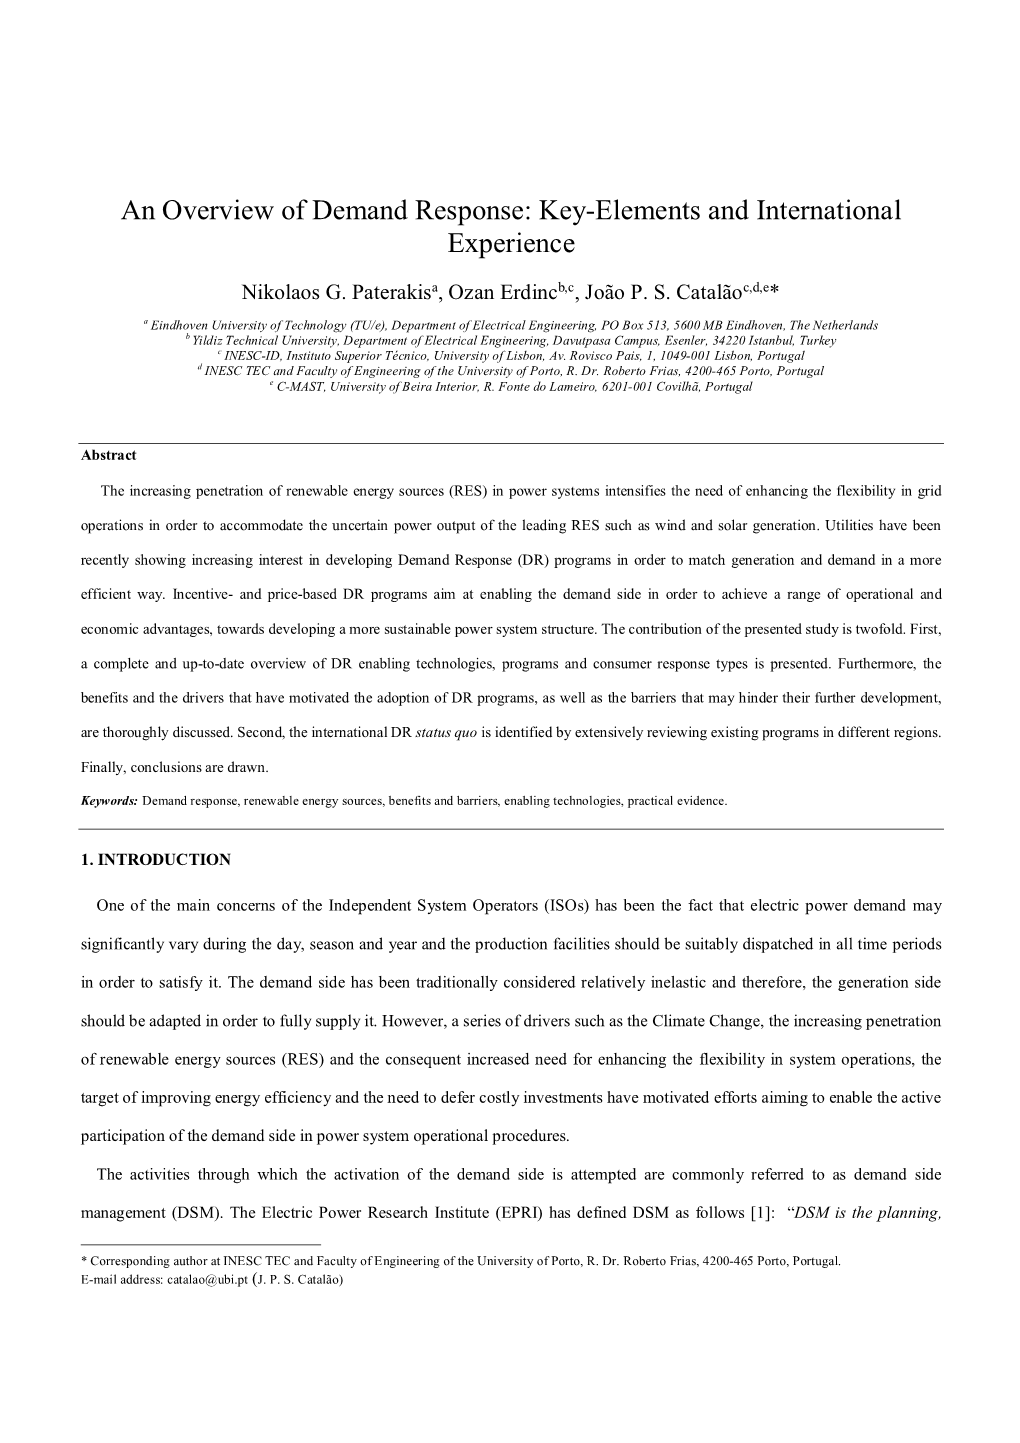 An Overview of Demand Response: Key-Elements and International Experience